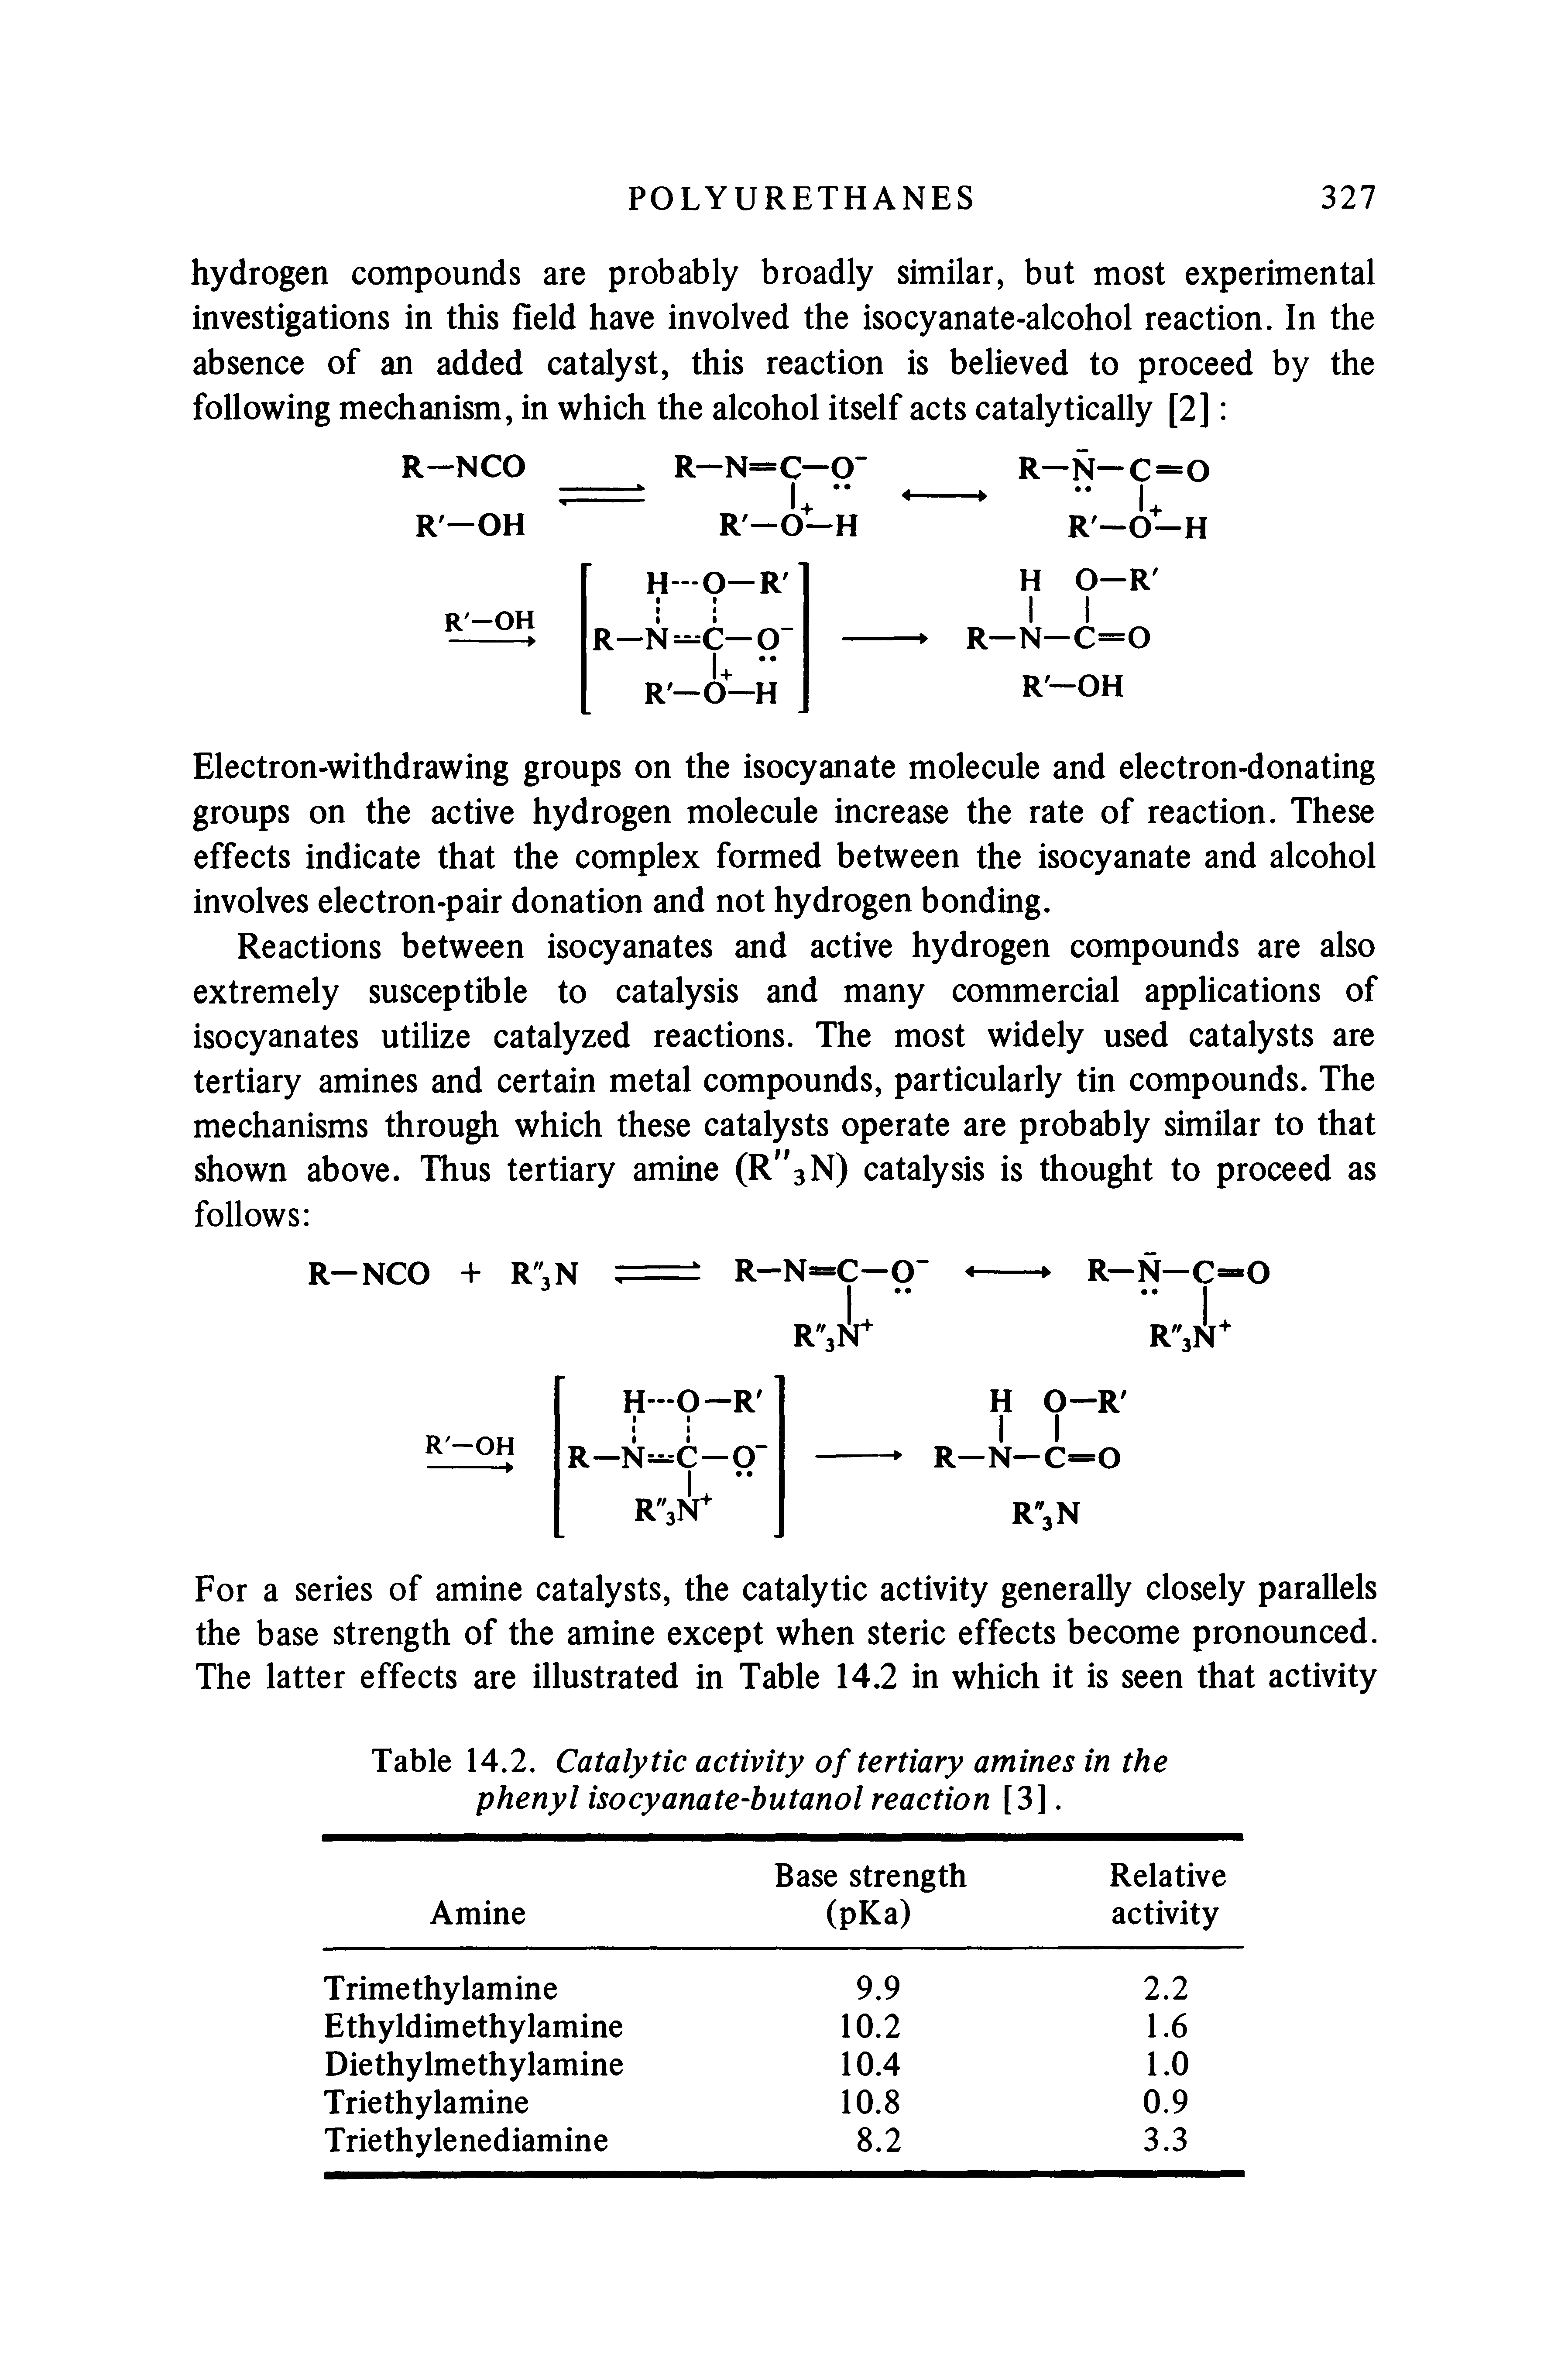 Table 14.2. Catalytic activity of tertiary amines in the phenyl isocyanate-hutanol reaction [3].